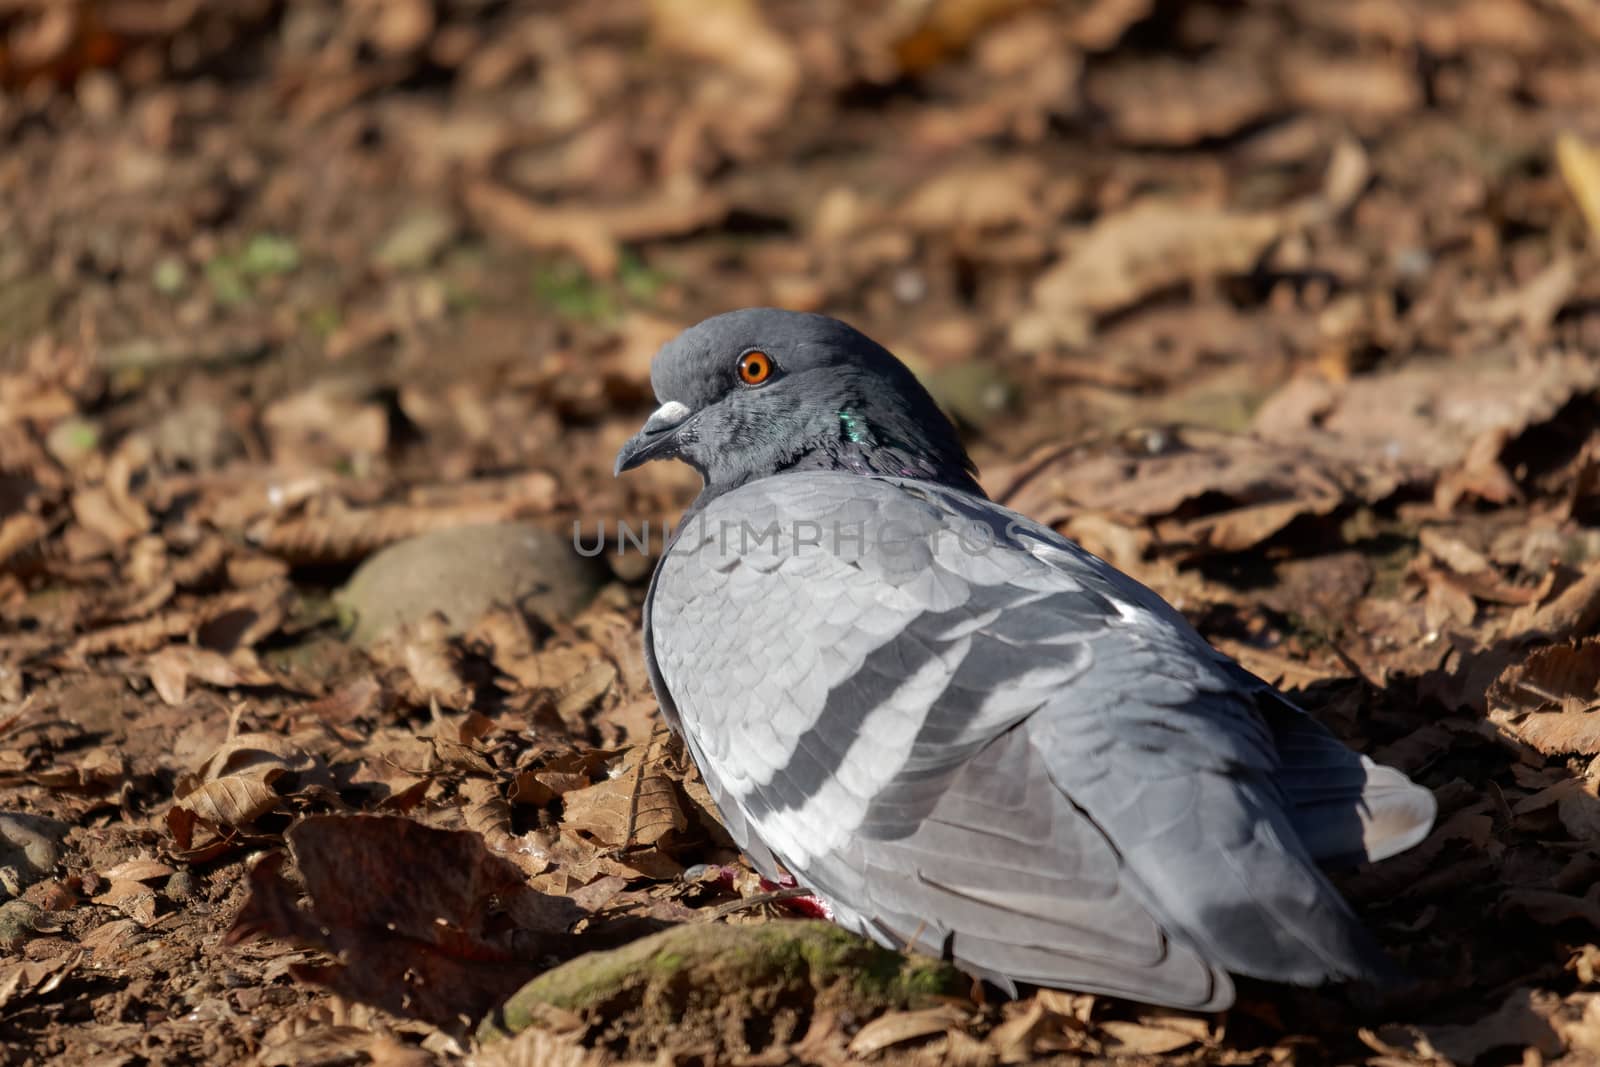 Pigeon basking in the sun in the Parco di Monza by phil_bird